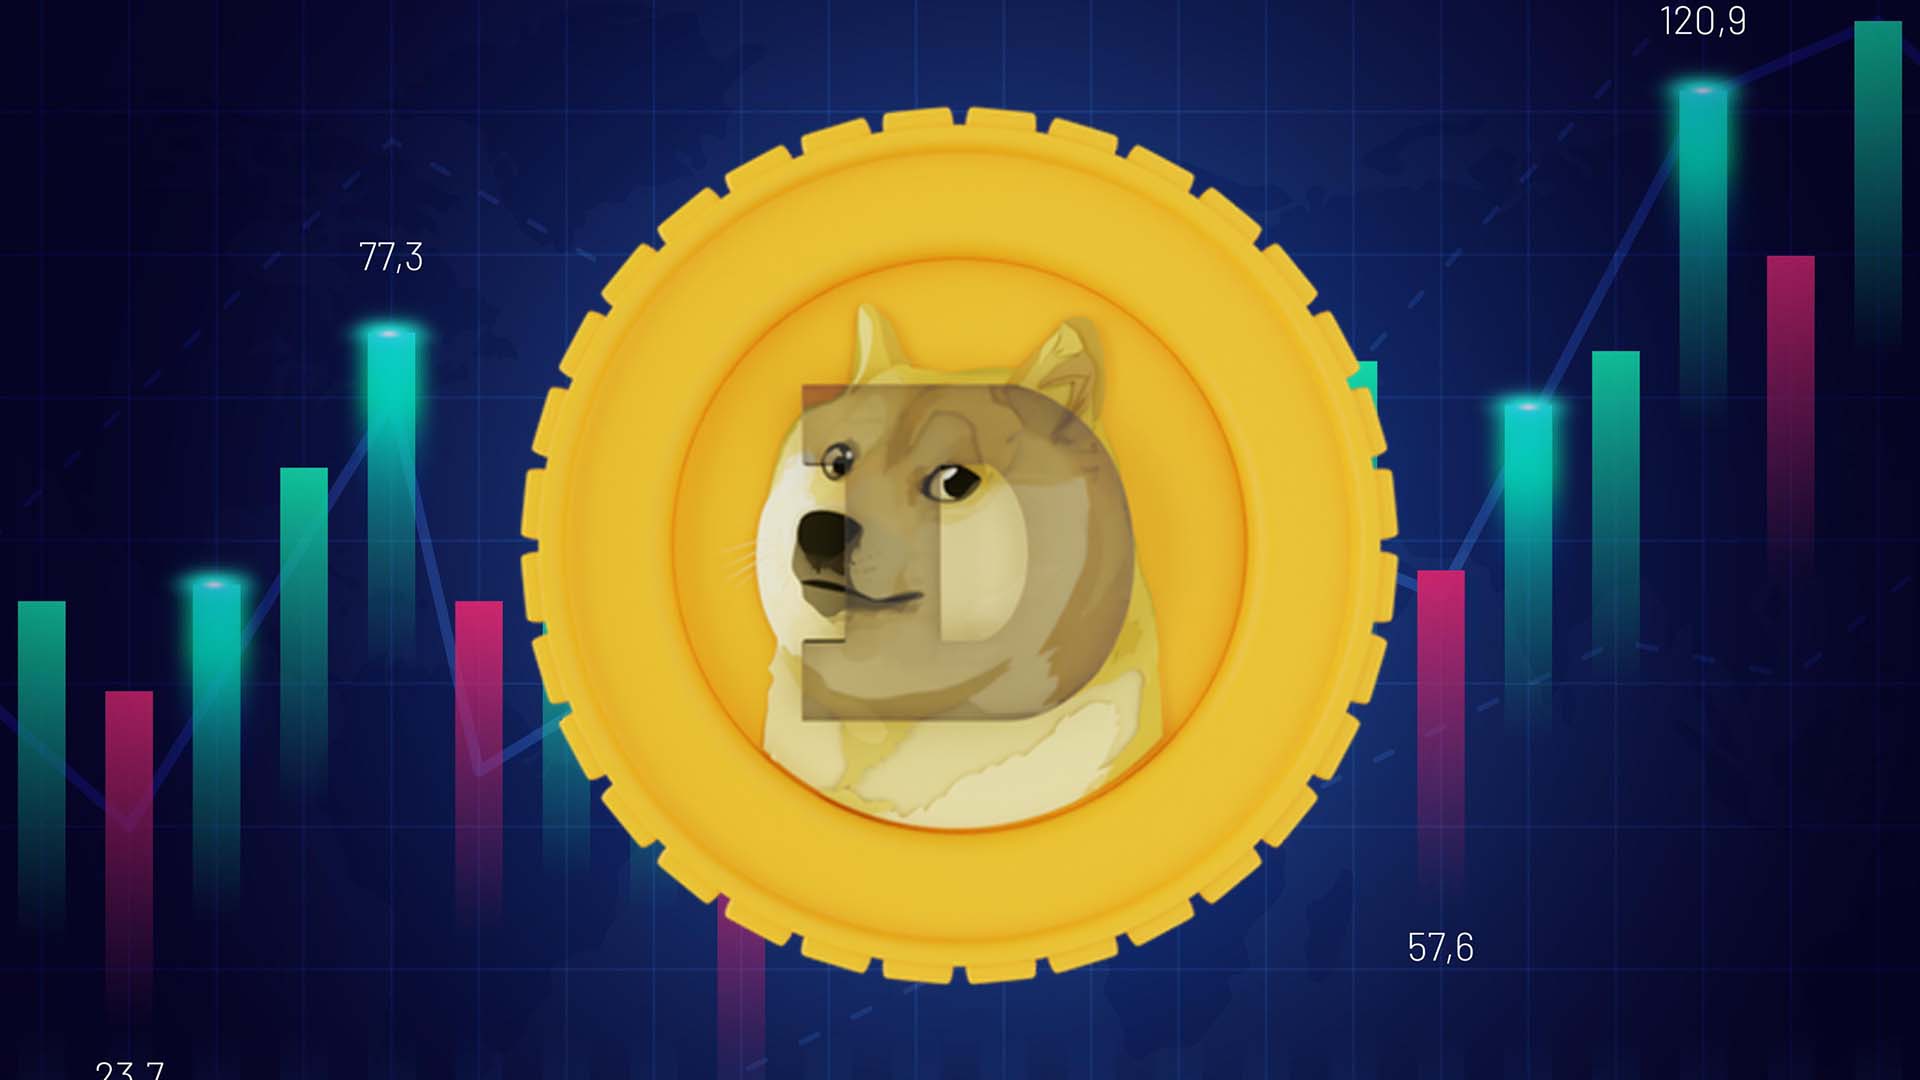 Dogecoin Price Prediction 2022-2030: A $1.0 Level Wants to Meet DOGE Investors, Long Build-up Occurs for 2023